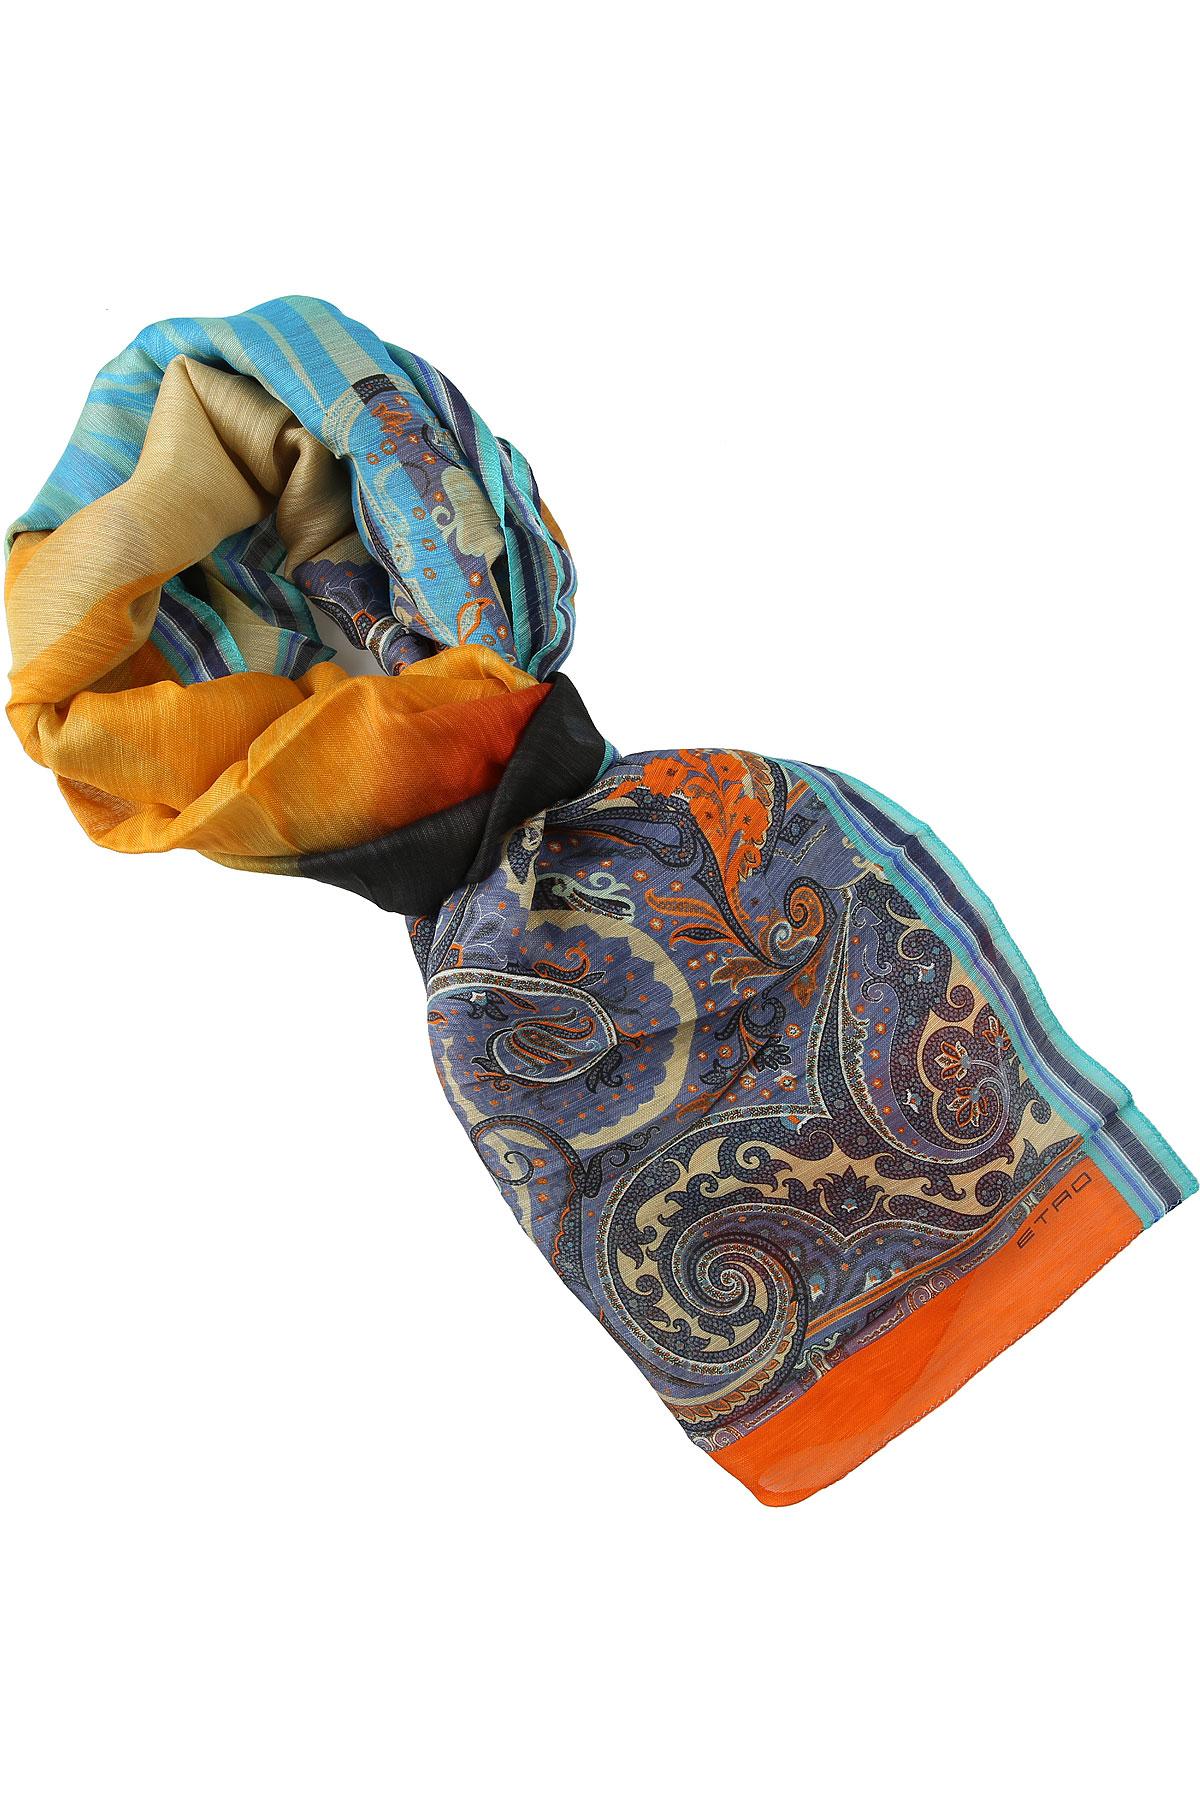 Etro Scarf For Men On Sale in Blue for Men - Lyst